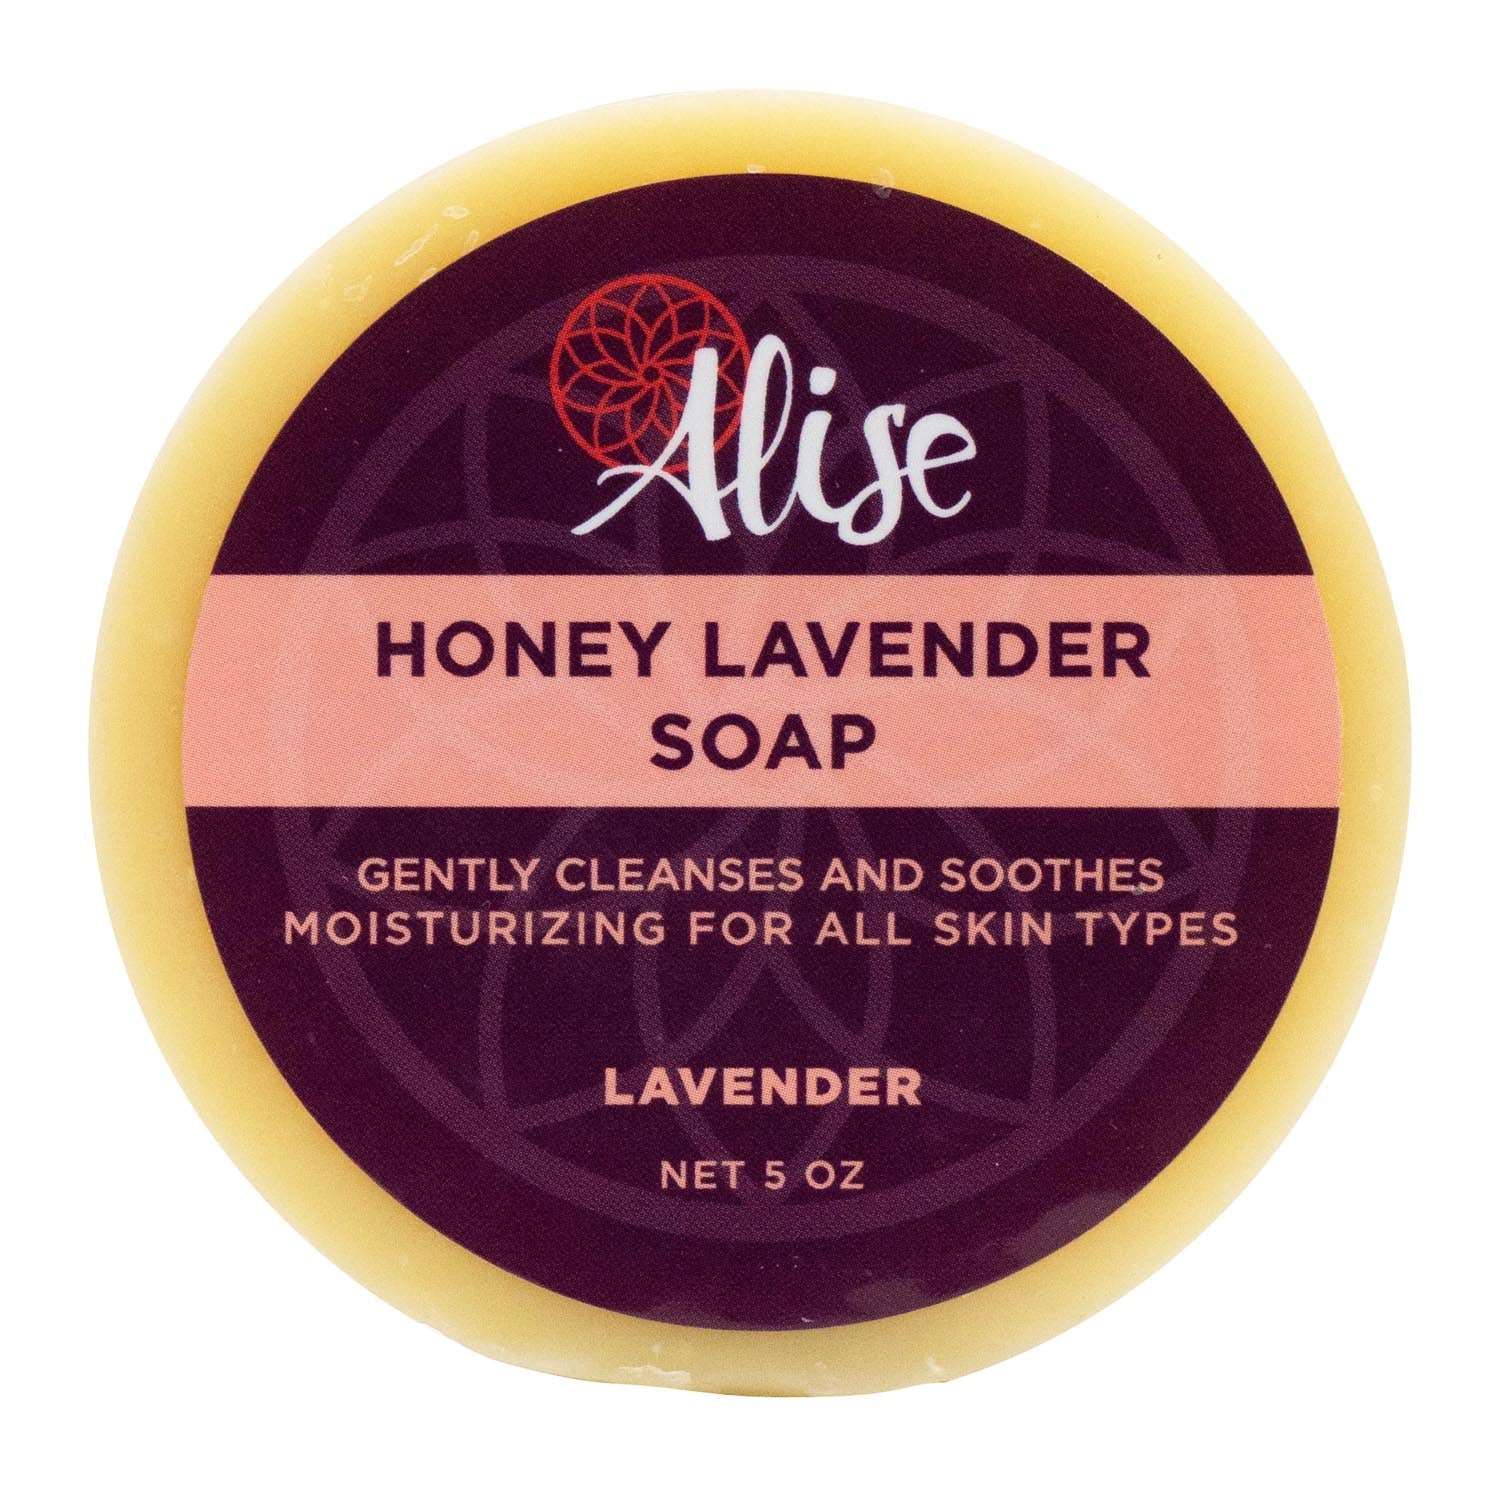 Honey Lavender Soap 5oz handcrafted by Alise Body Care